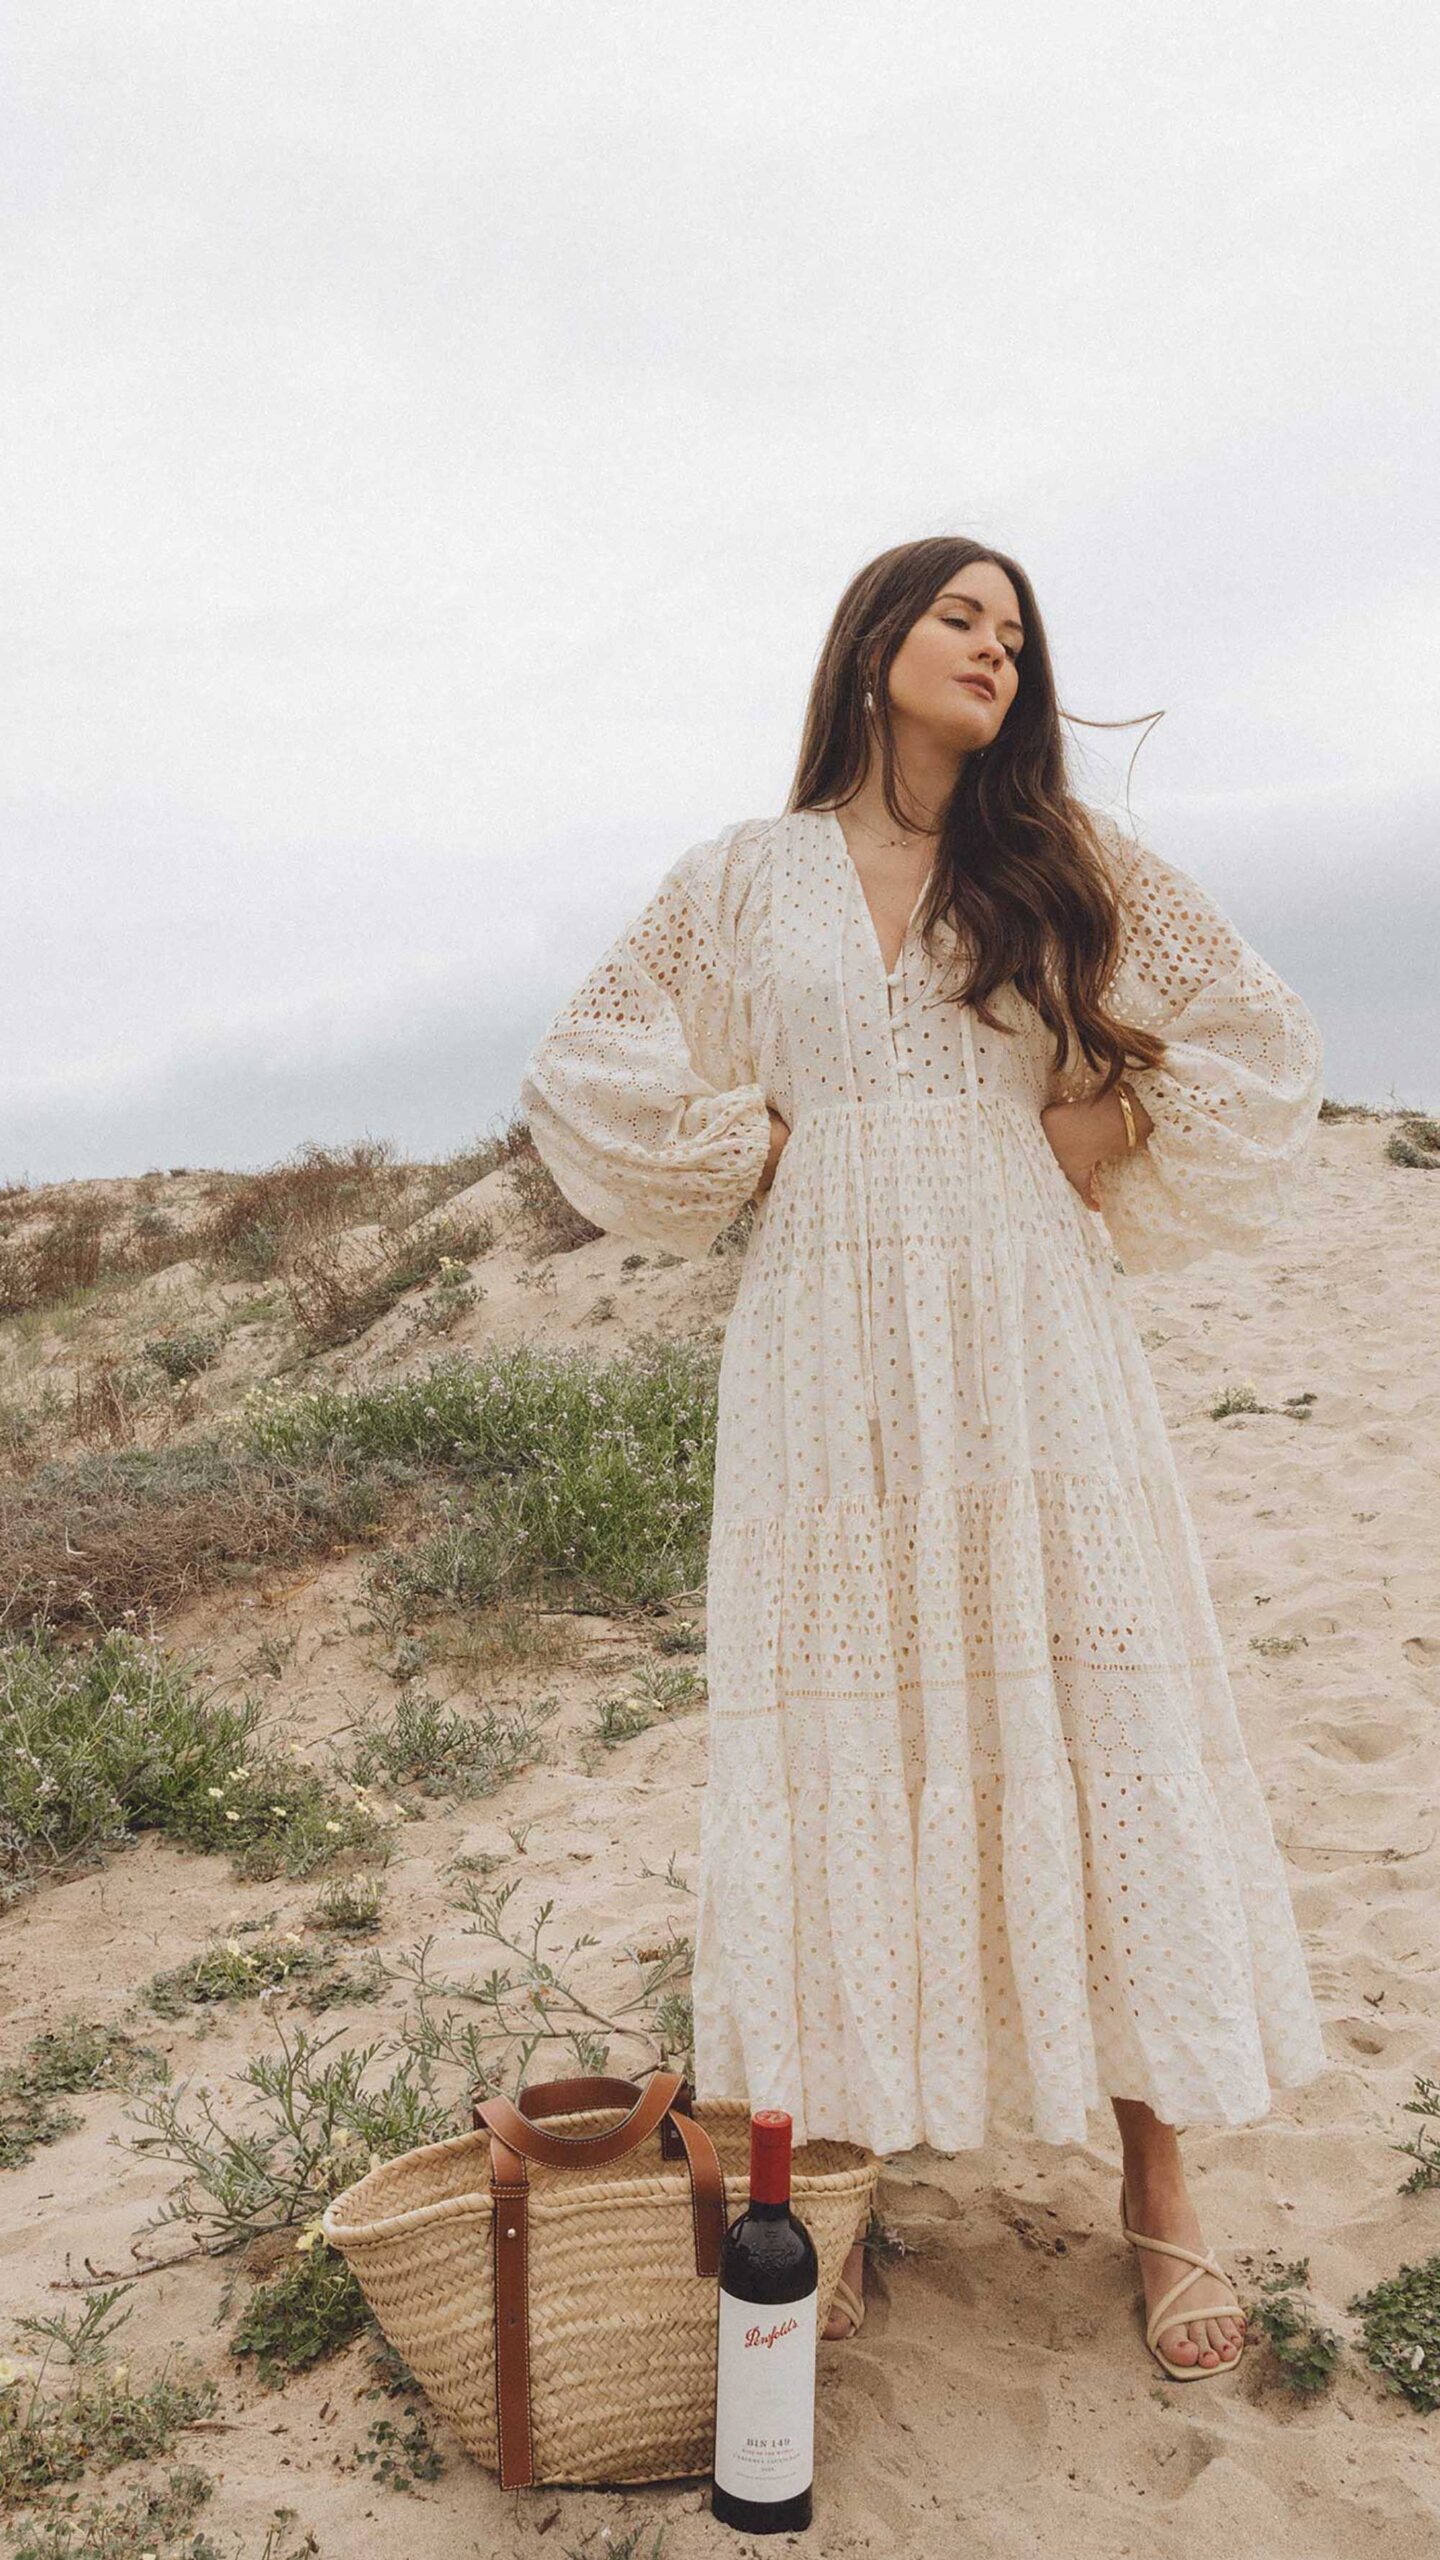 Make a Statement with Beach Dresses: Chic and Comfortable Options for Sunny Days